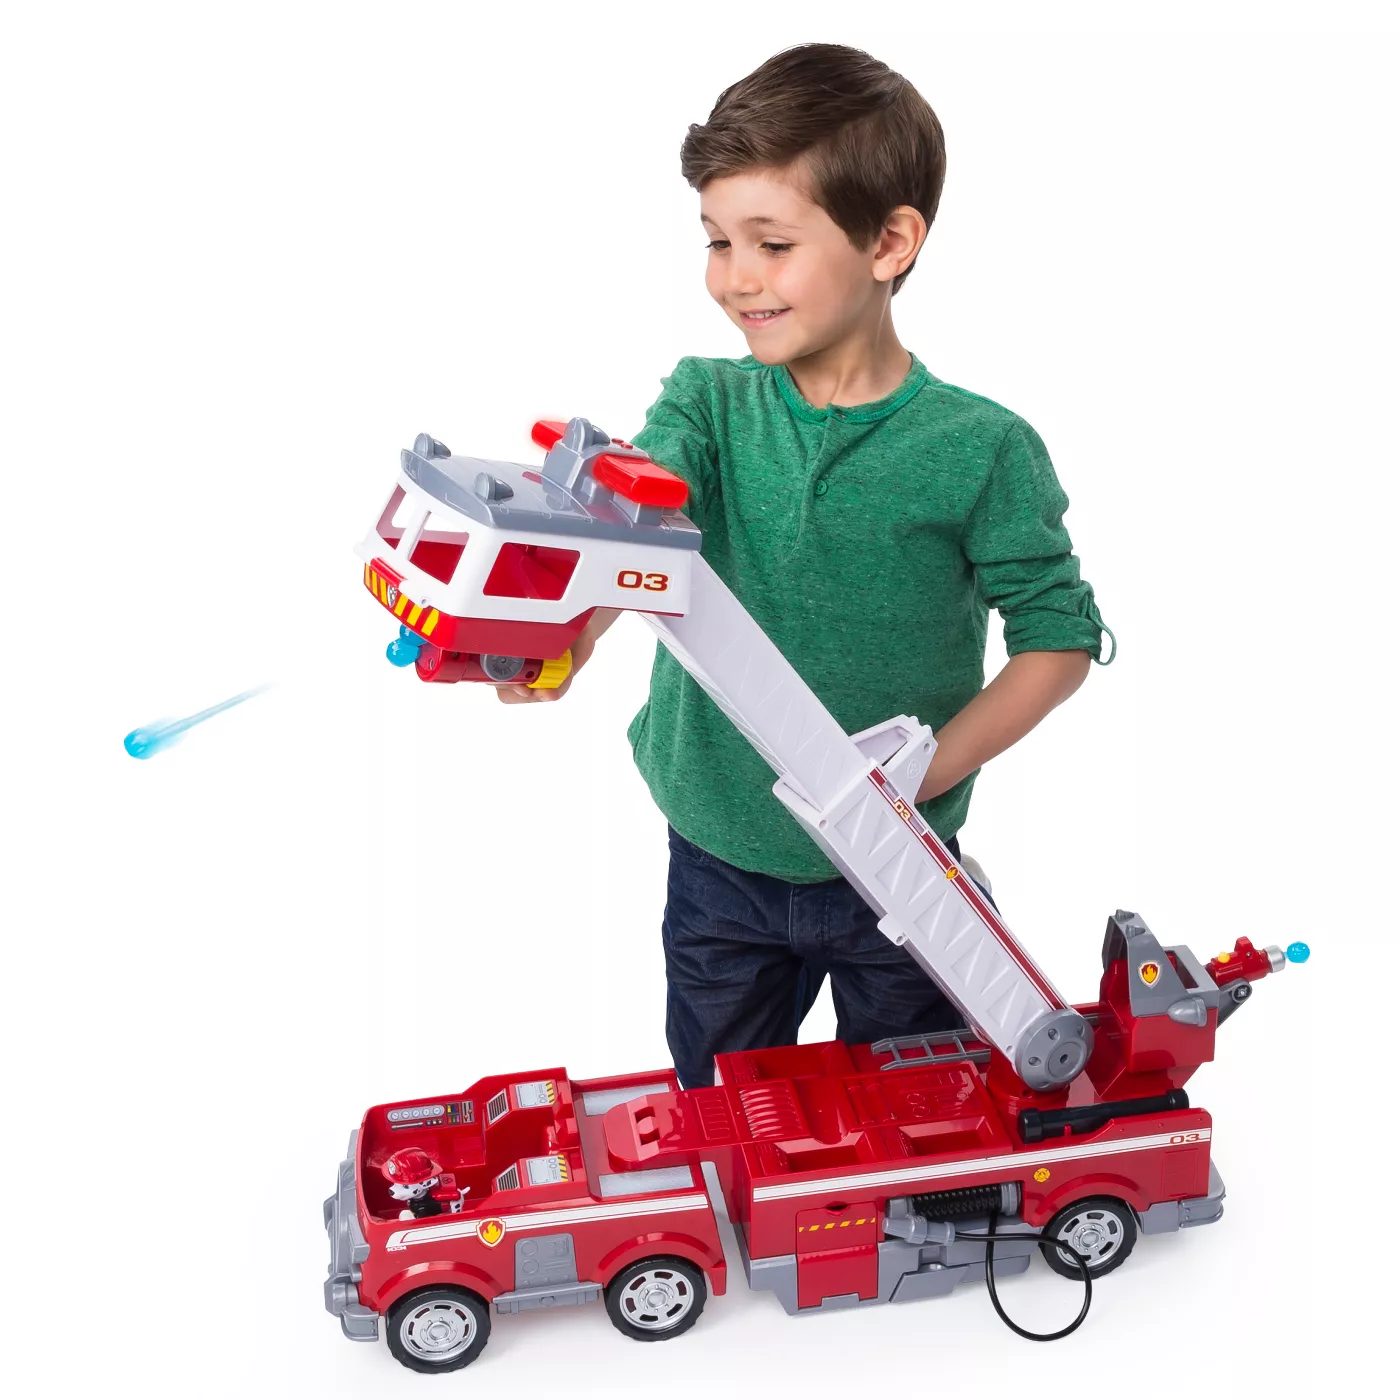 PAW Patrol Ultimate Fire Truck - image 3 of 8